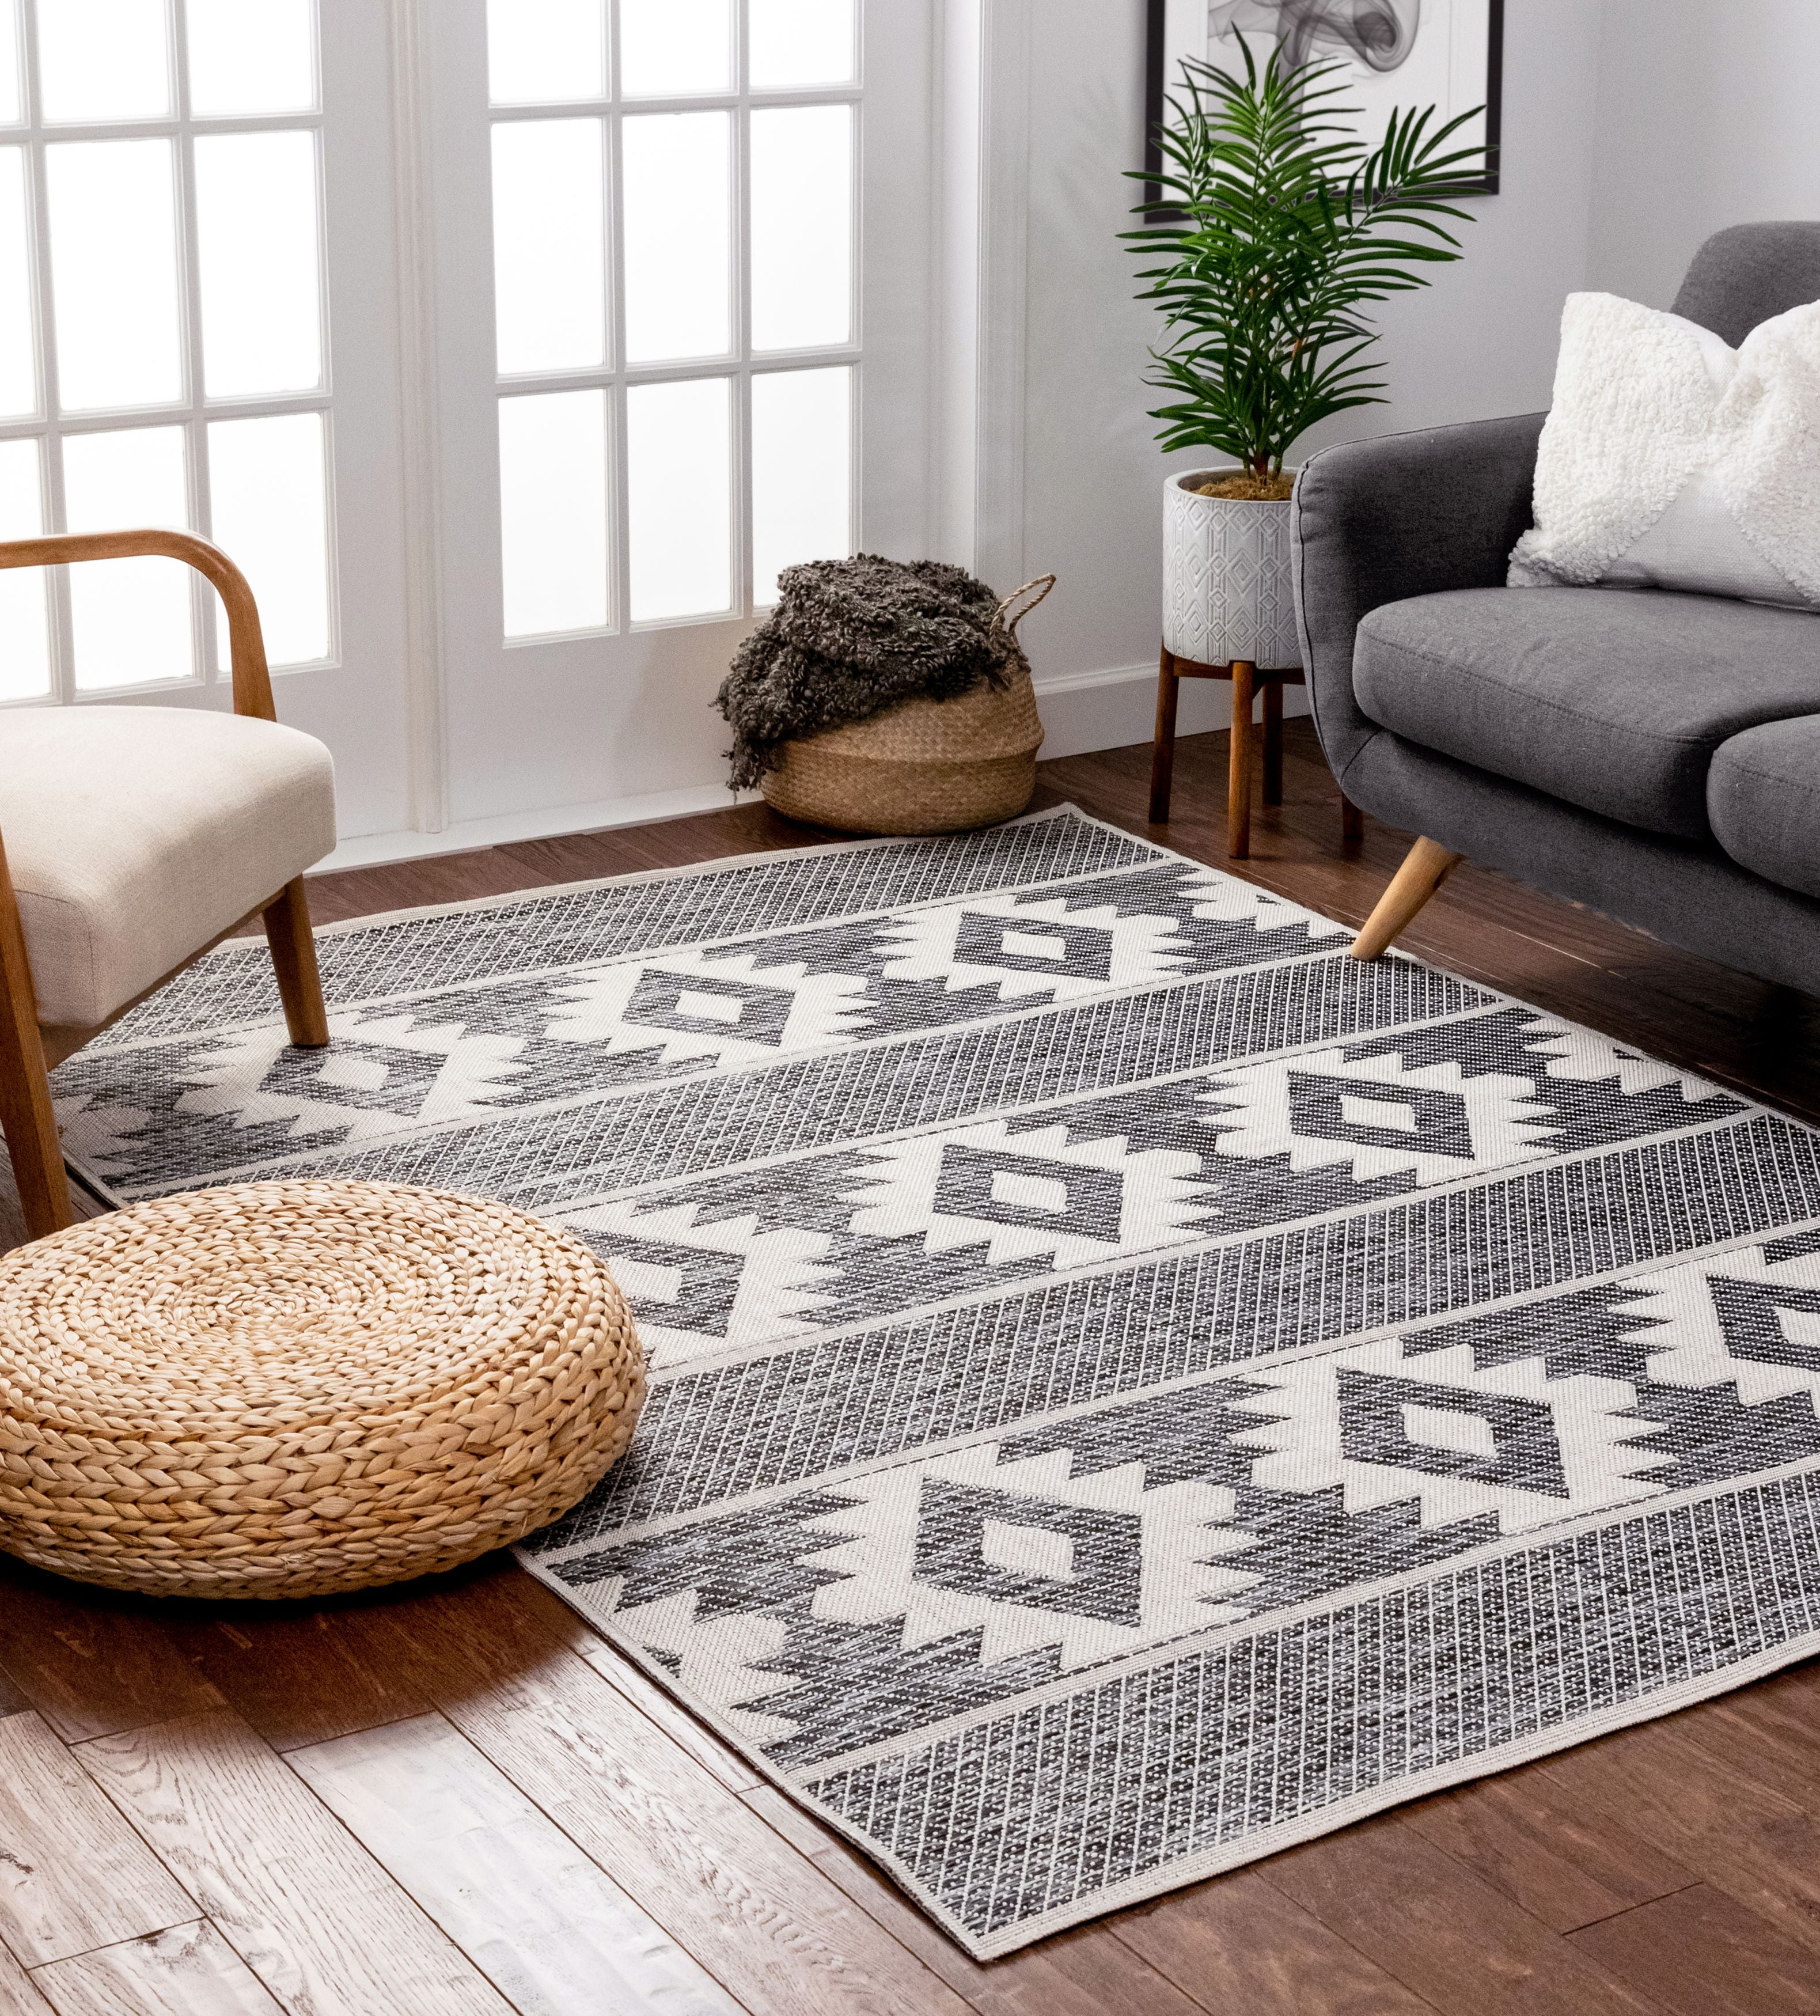 Portland Soft Grey Geometric Moroccan Design Hand-carved ALL SIZES Rugs Runners 